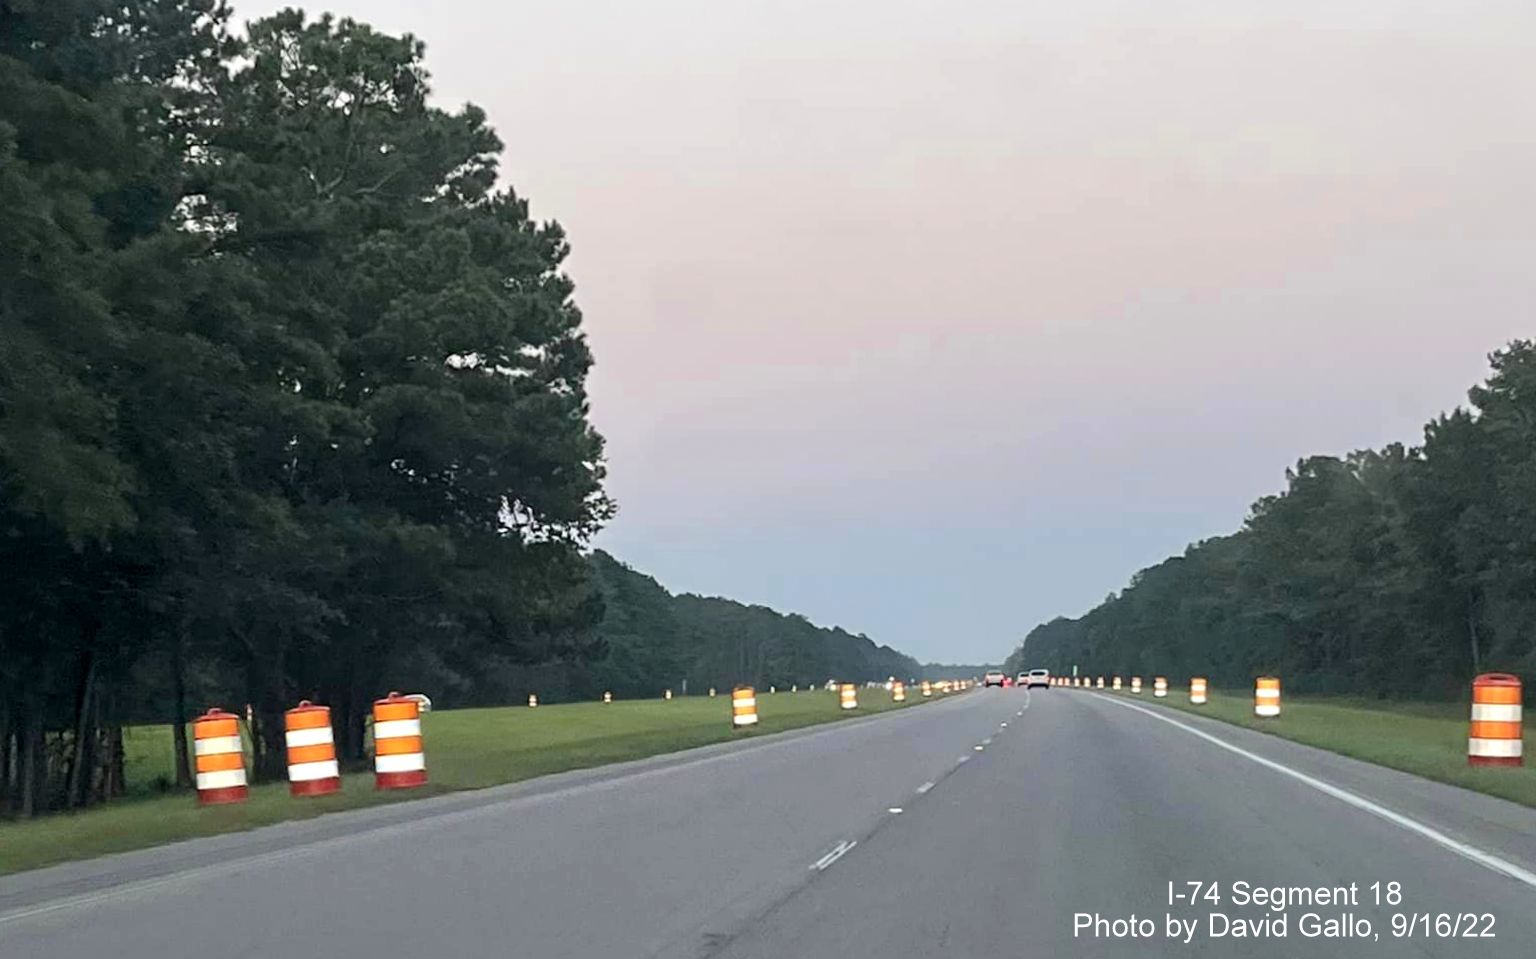 Image of construction barrels along US 74 West prior to new Lake Waccamaw interchange construction zone, by David Gallo, September 2022